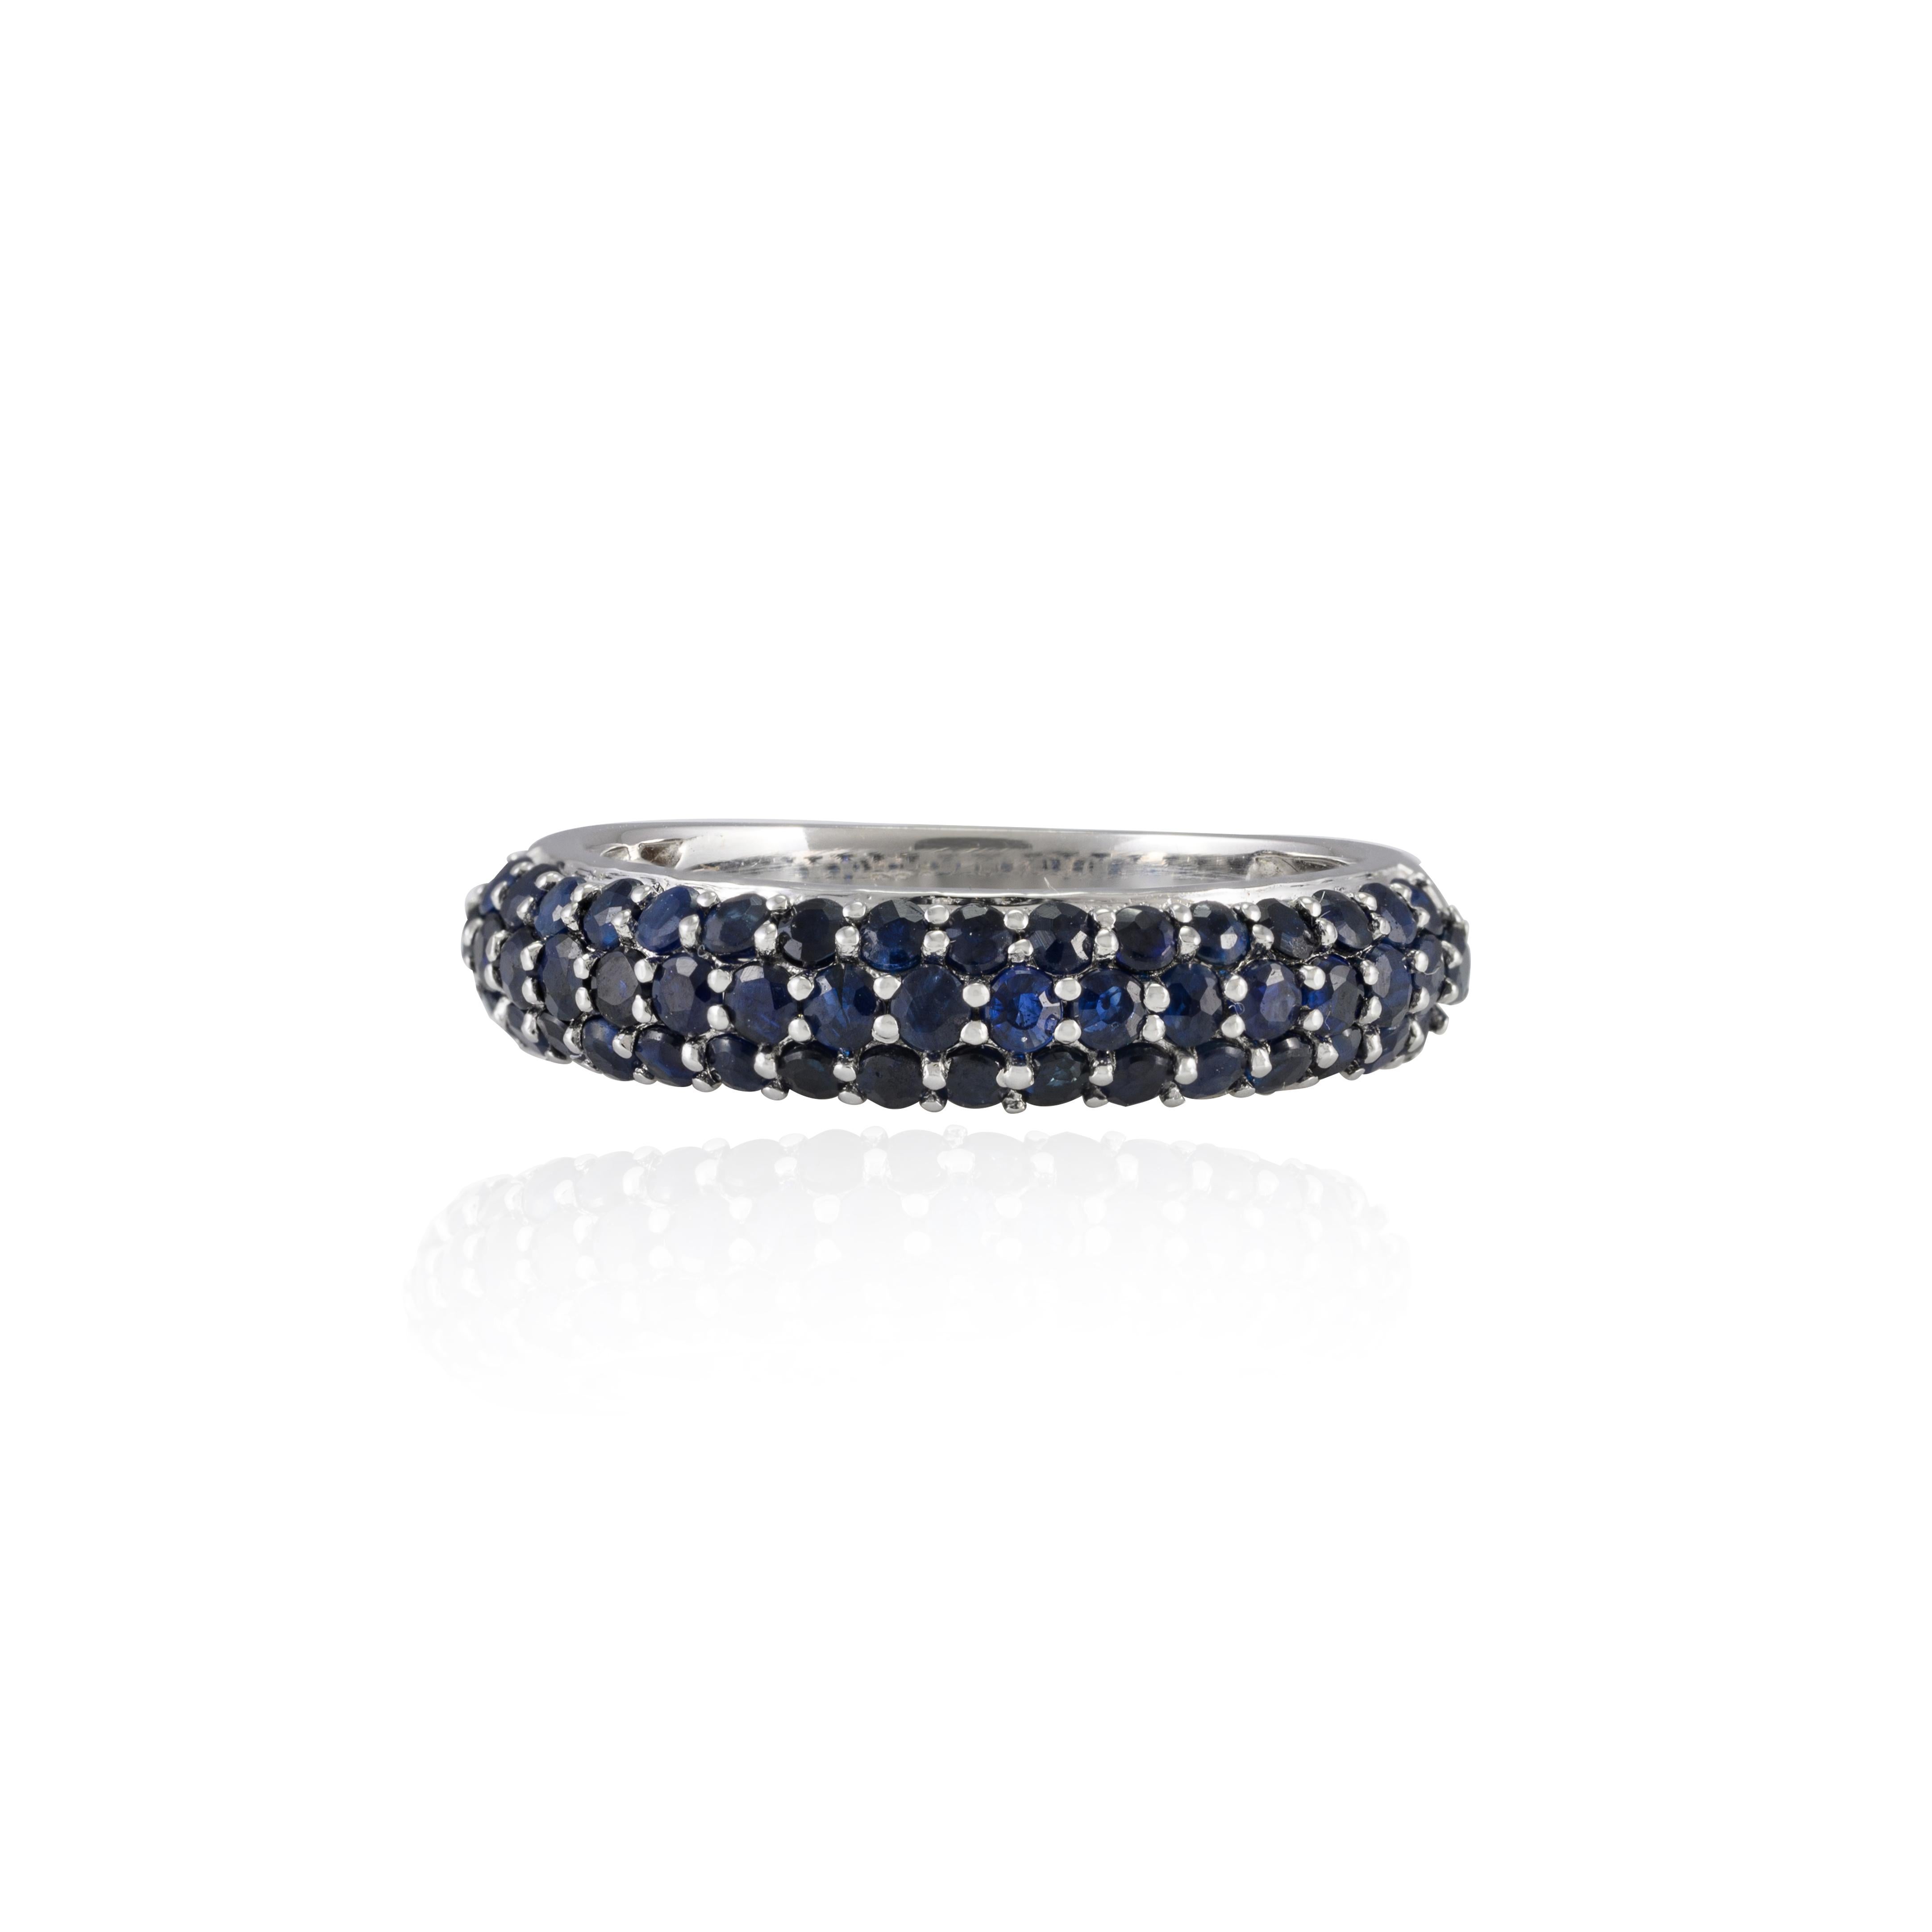 For Sale:  18k Solid White Gold 1.3 Ct Pave Set Deep Blue Sapphire Dome Ring Eternity Band  3